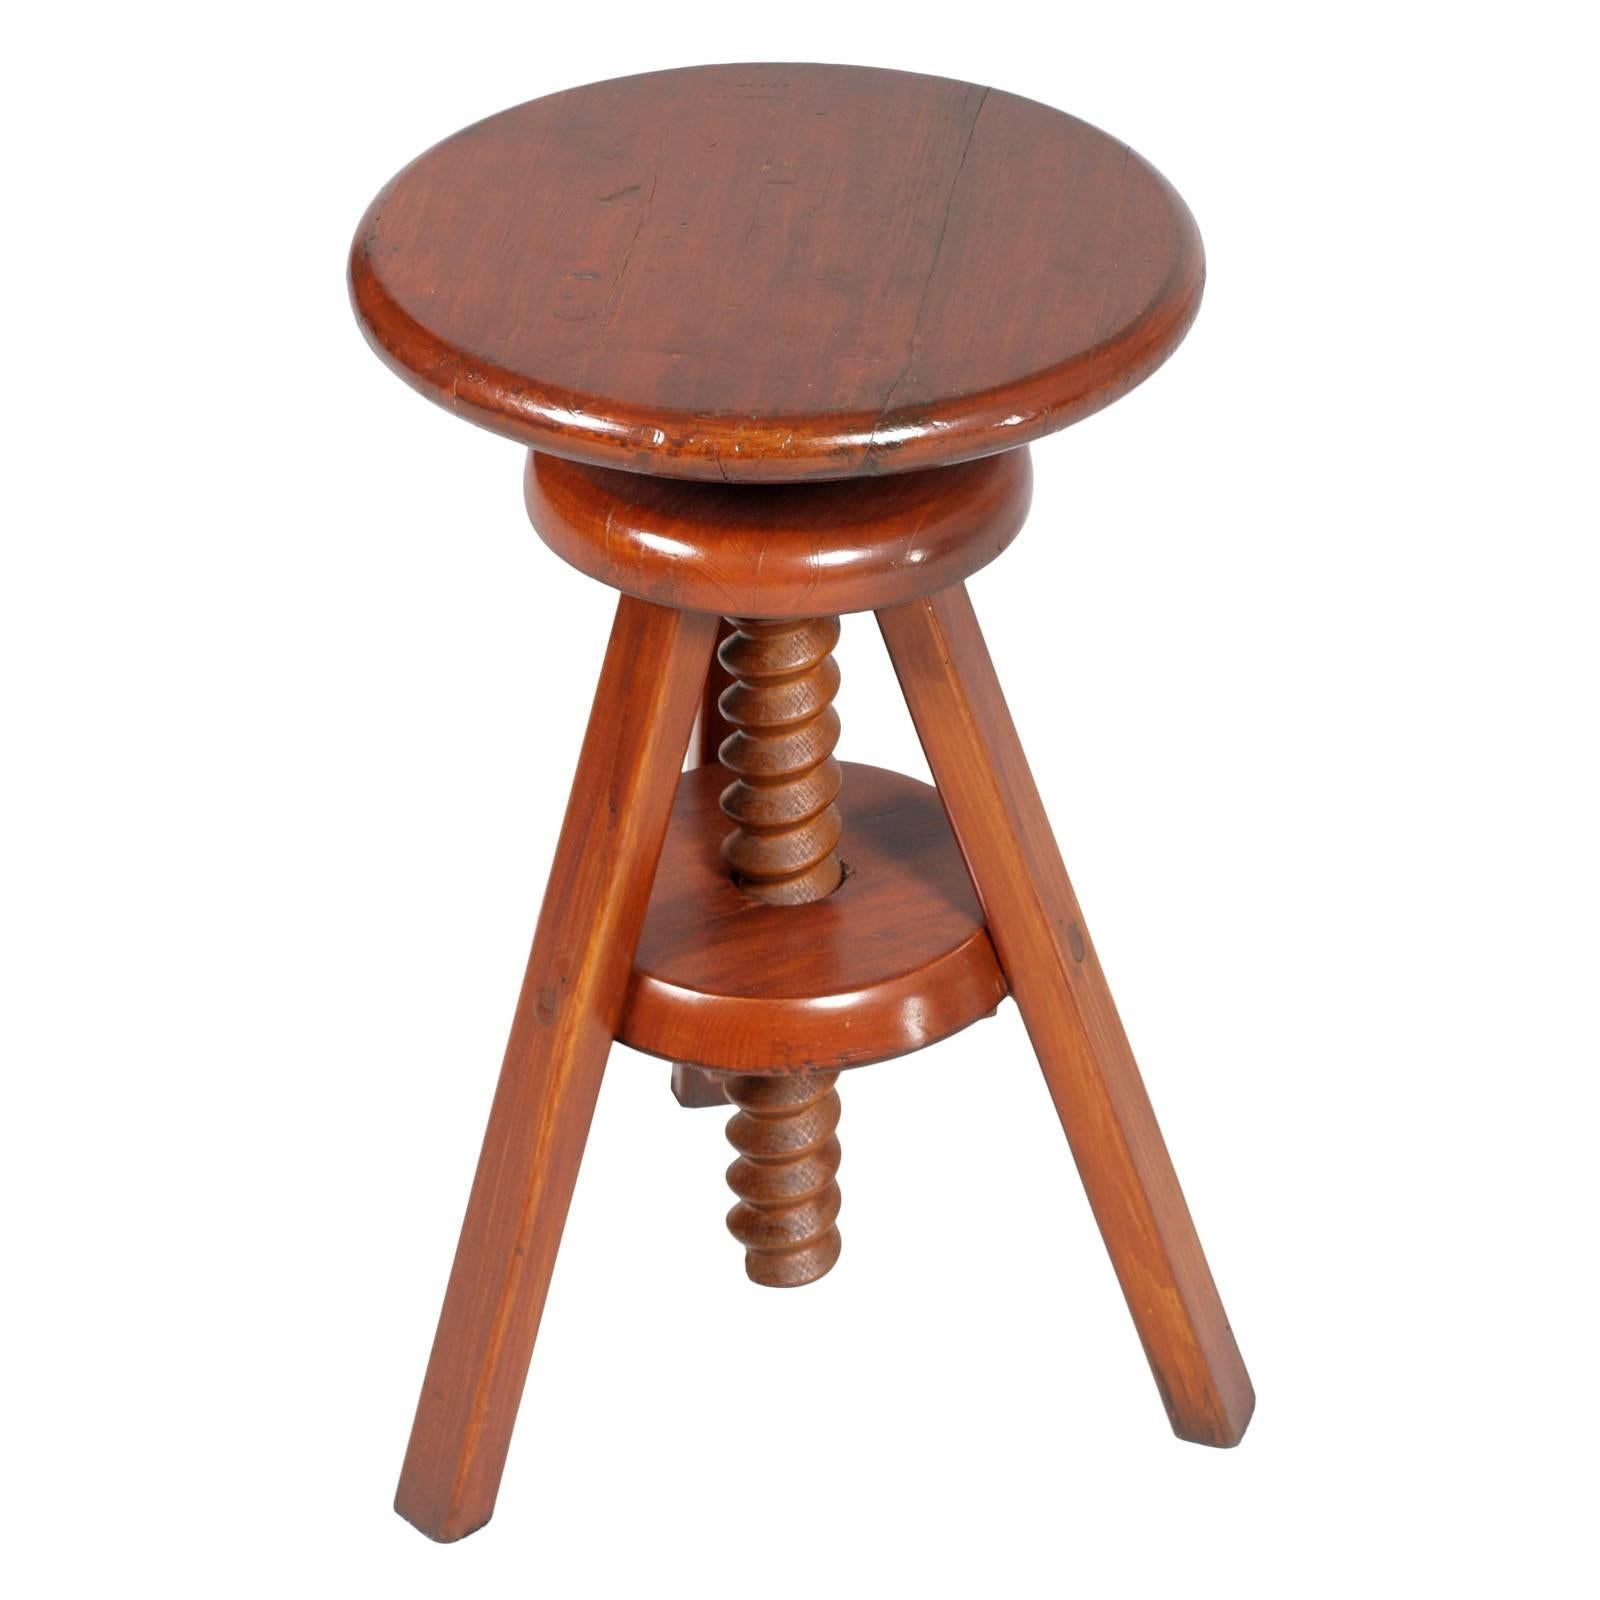 Mid-20th Century Tyrolean Adjustable Tripod Stool, in Red Larch Polished to Wax For Sale